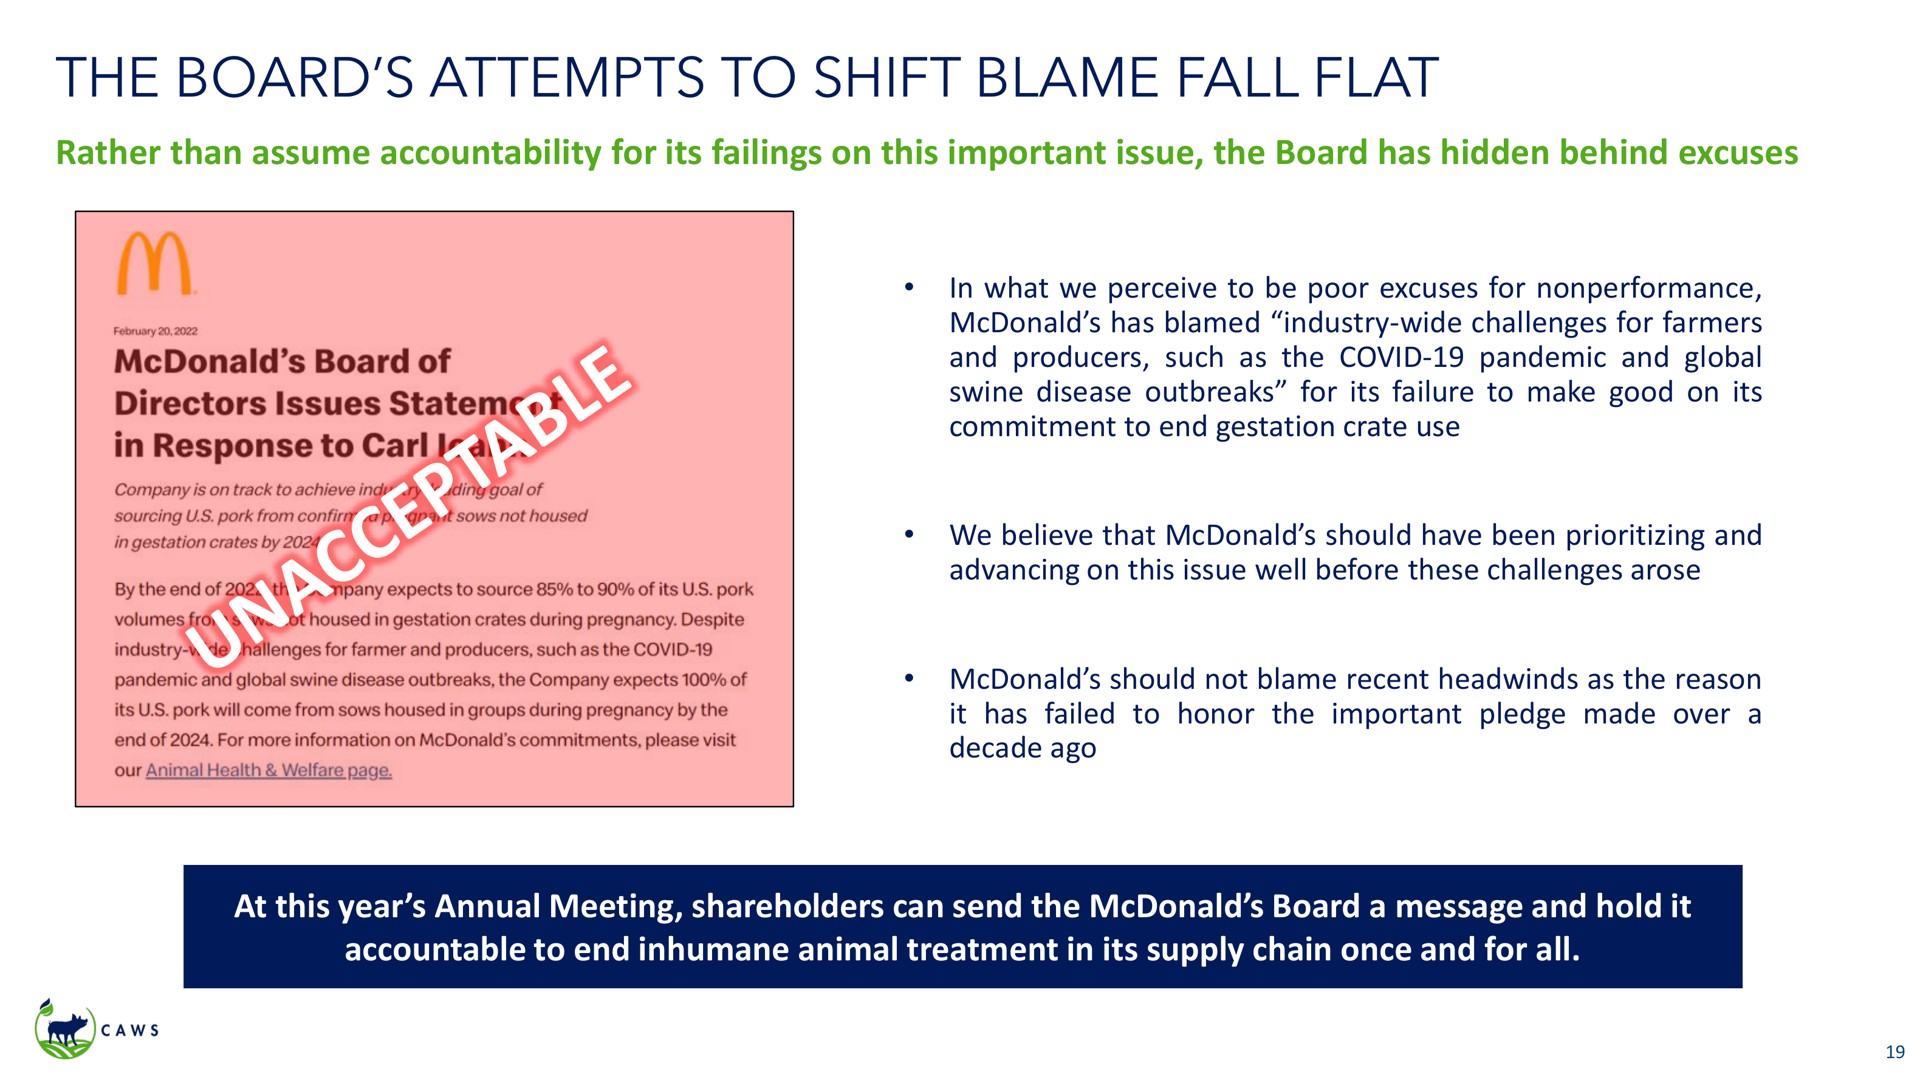 the board attempts to shift blame fall flat | Icahn Enterprises